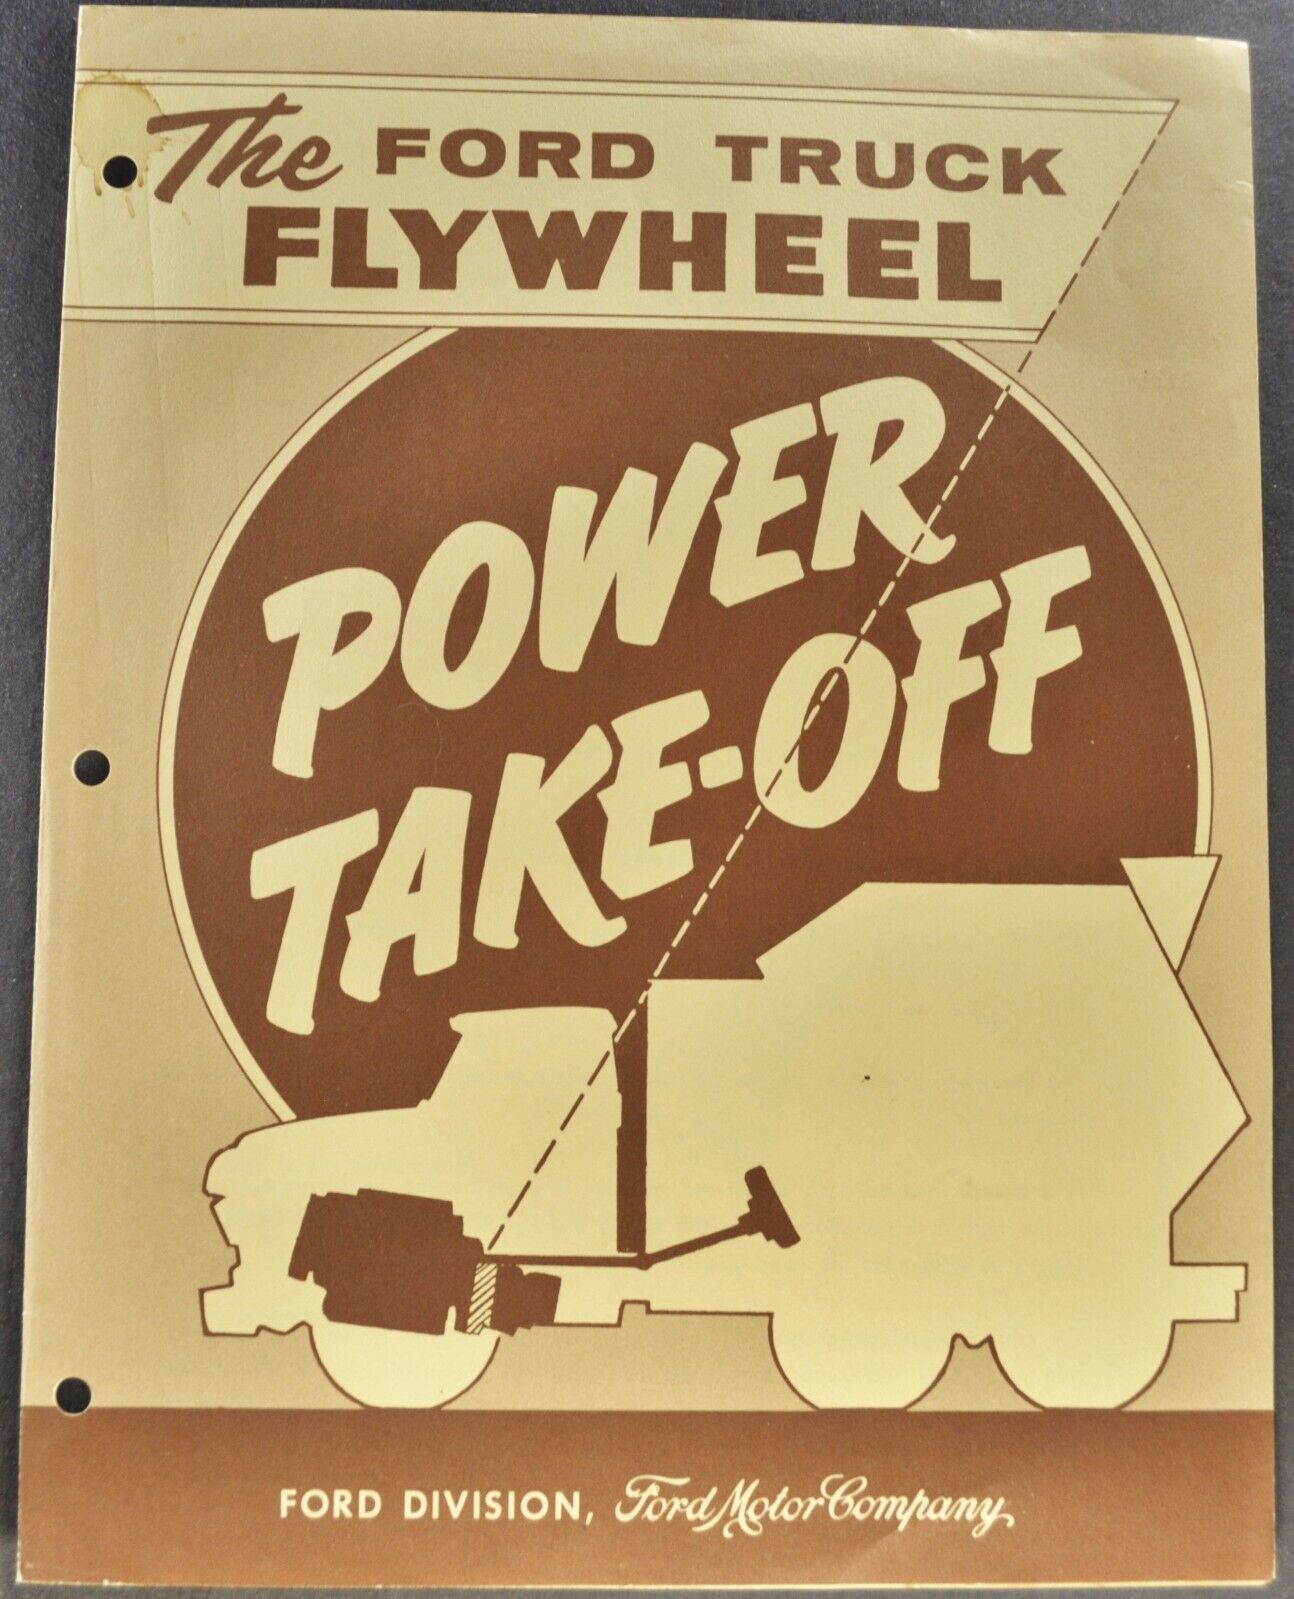 1961 Ford Heavy Truck Power Take-Off Brochure Folder Cement Excellent Original